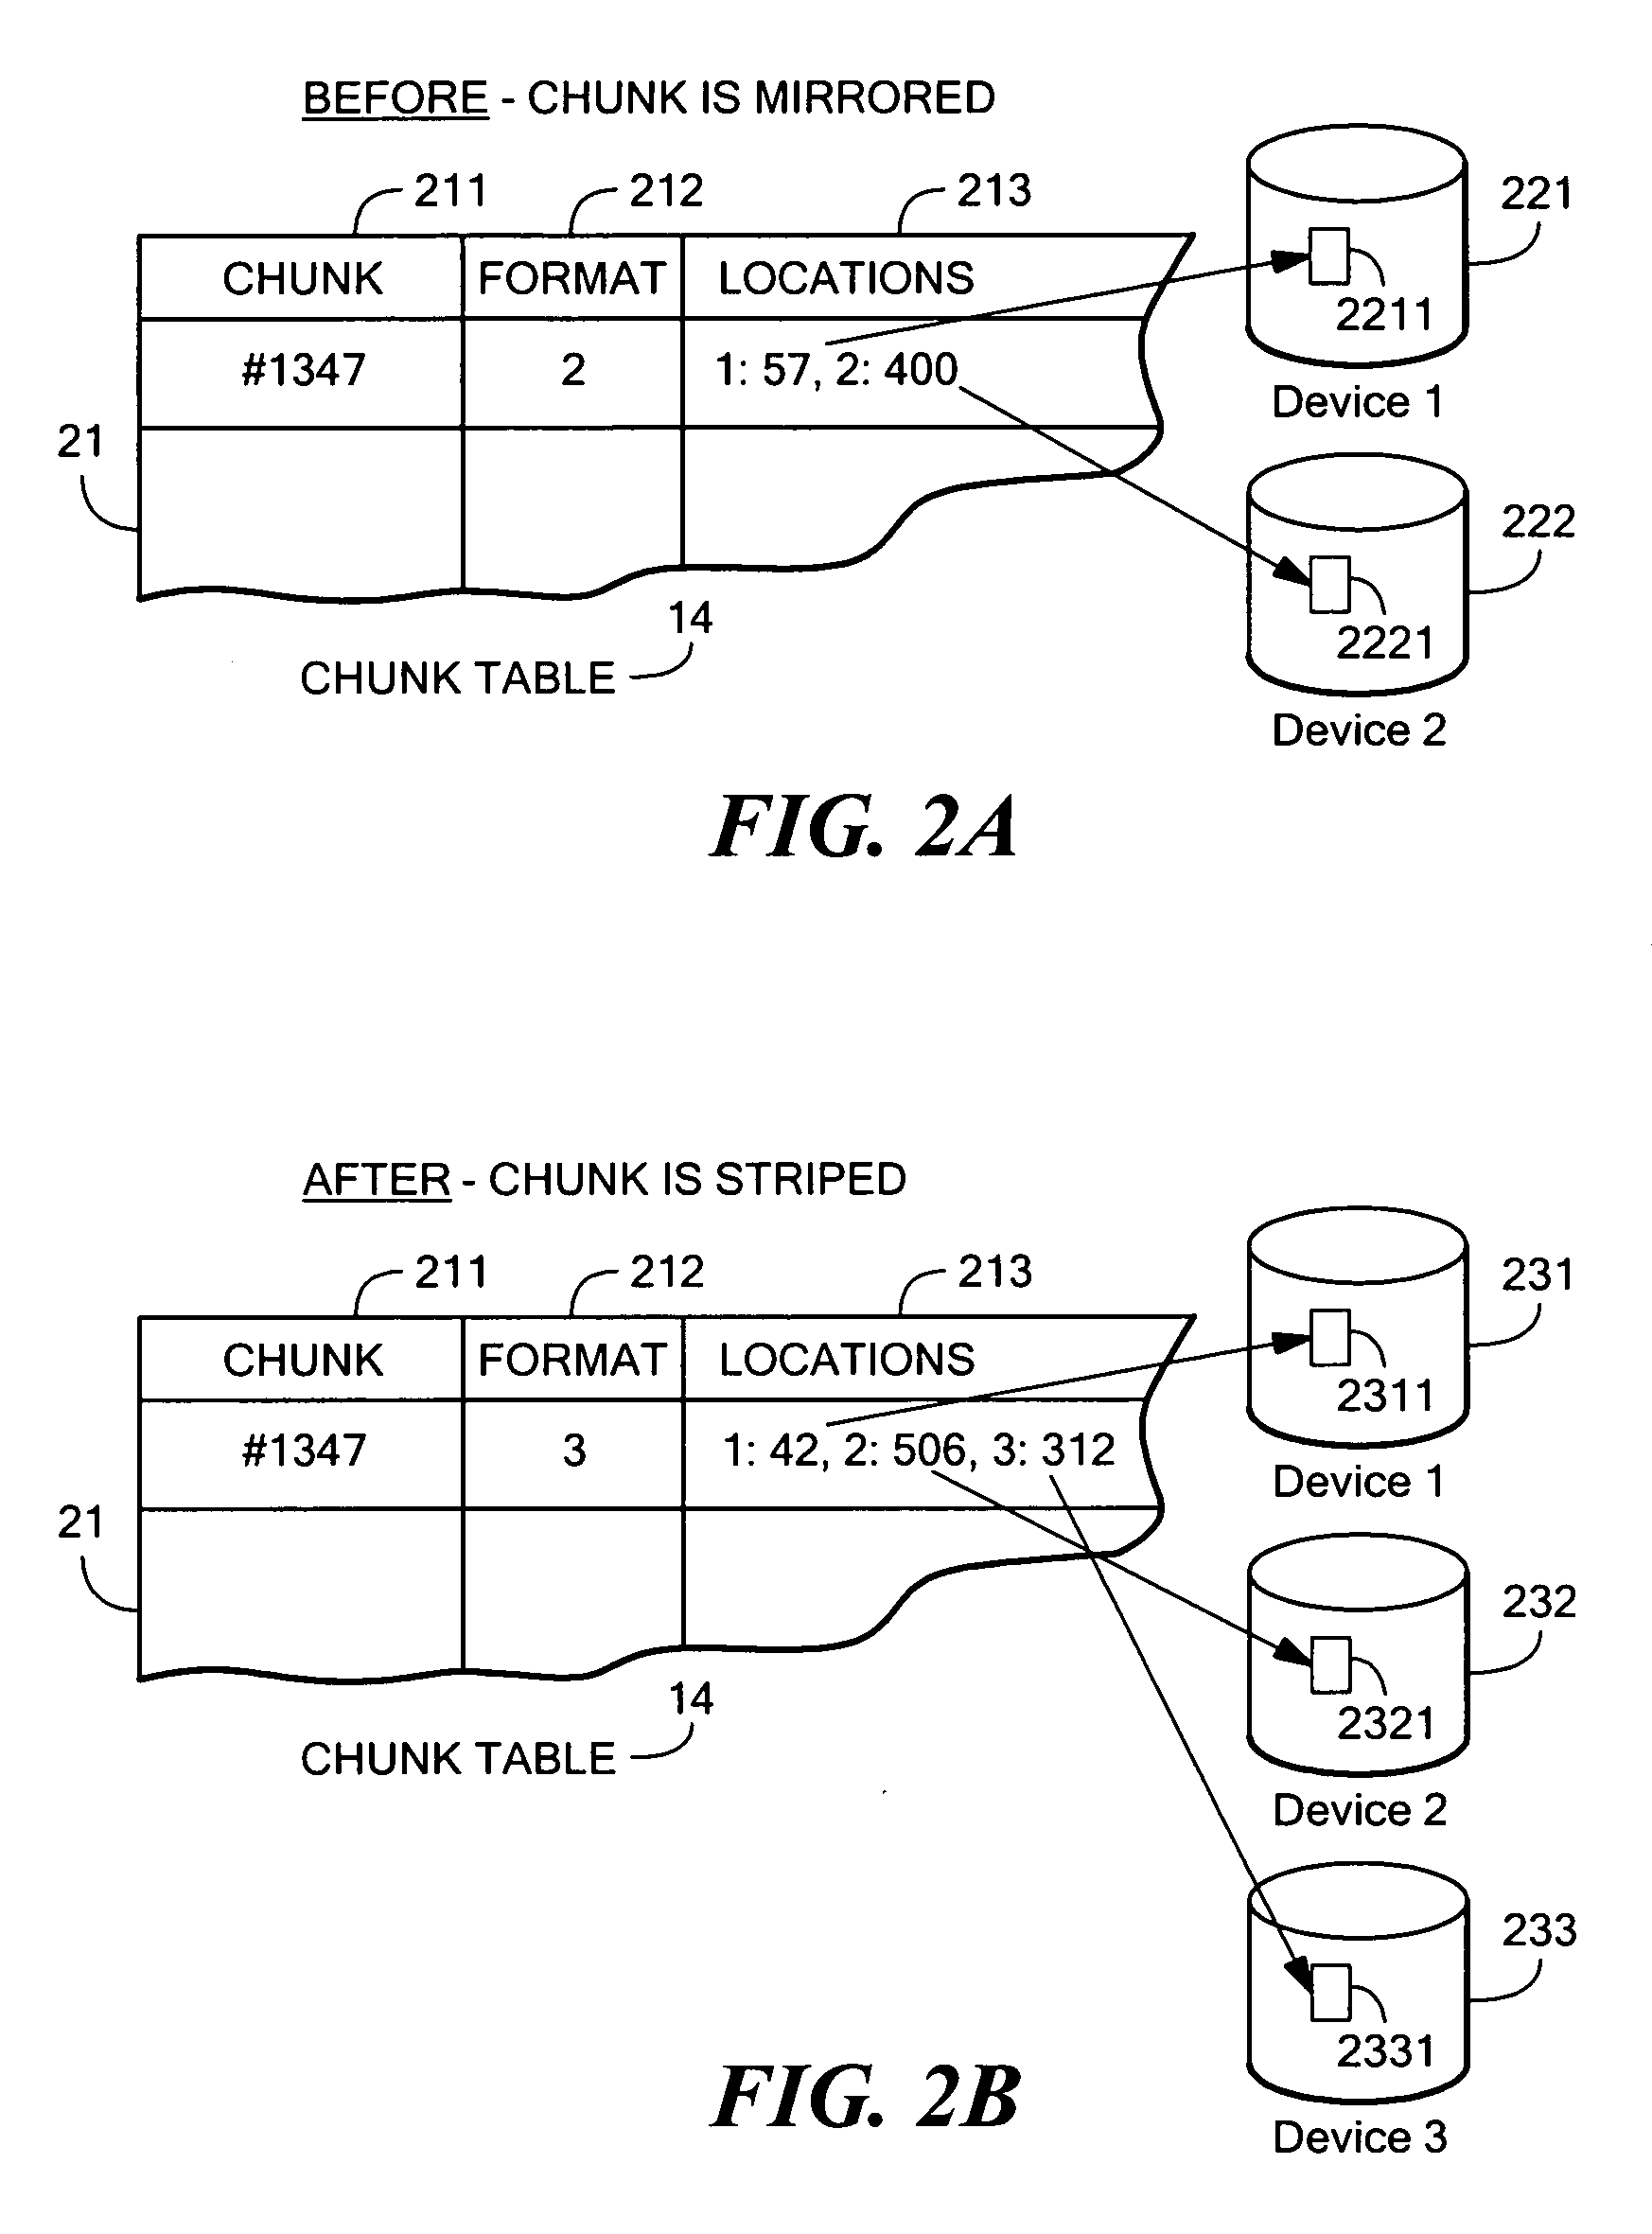 Dynamically expandable and contractible fault-tolerant storage system permitting variously sized storage devices and method